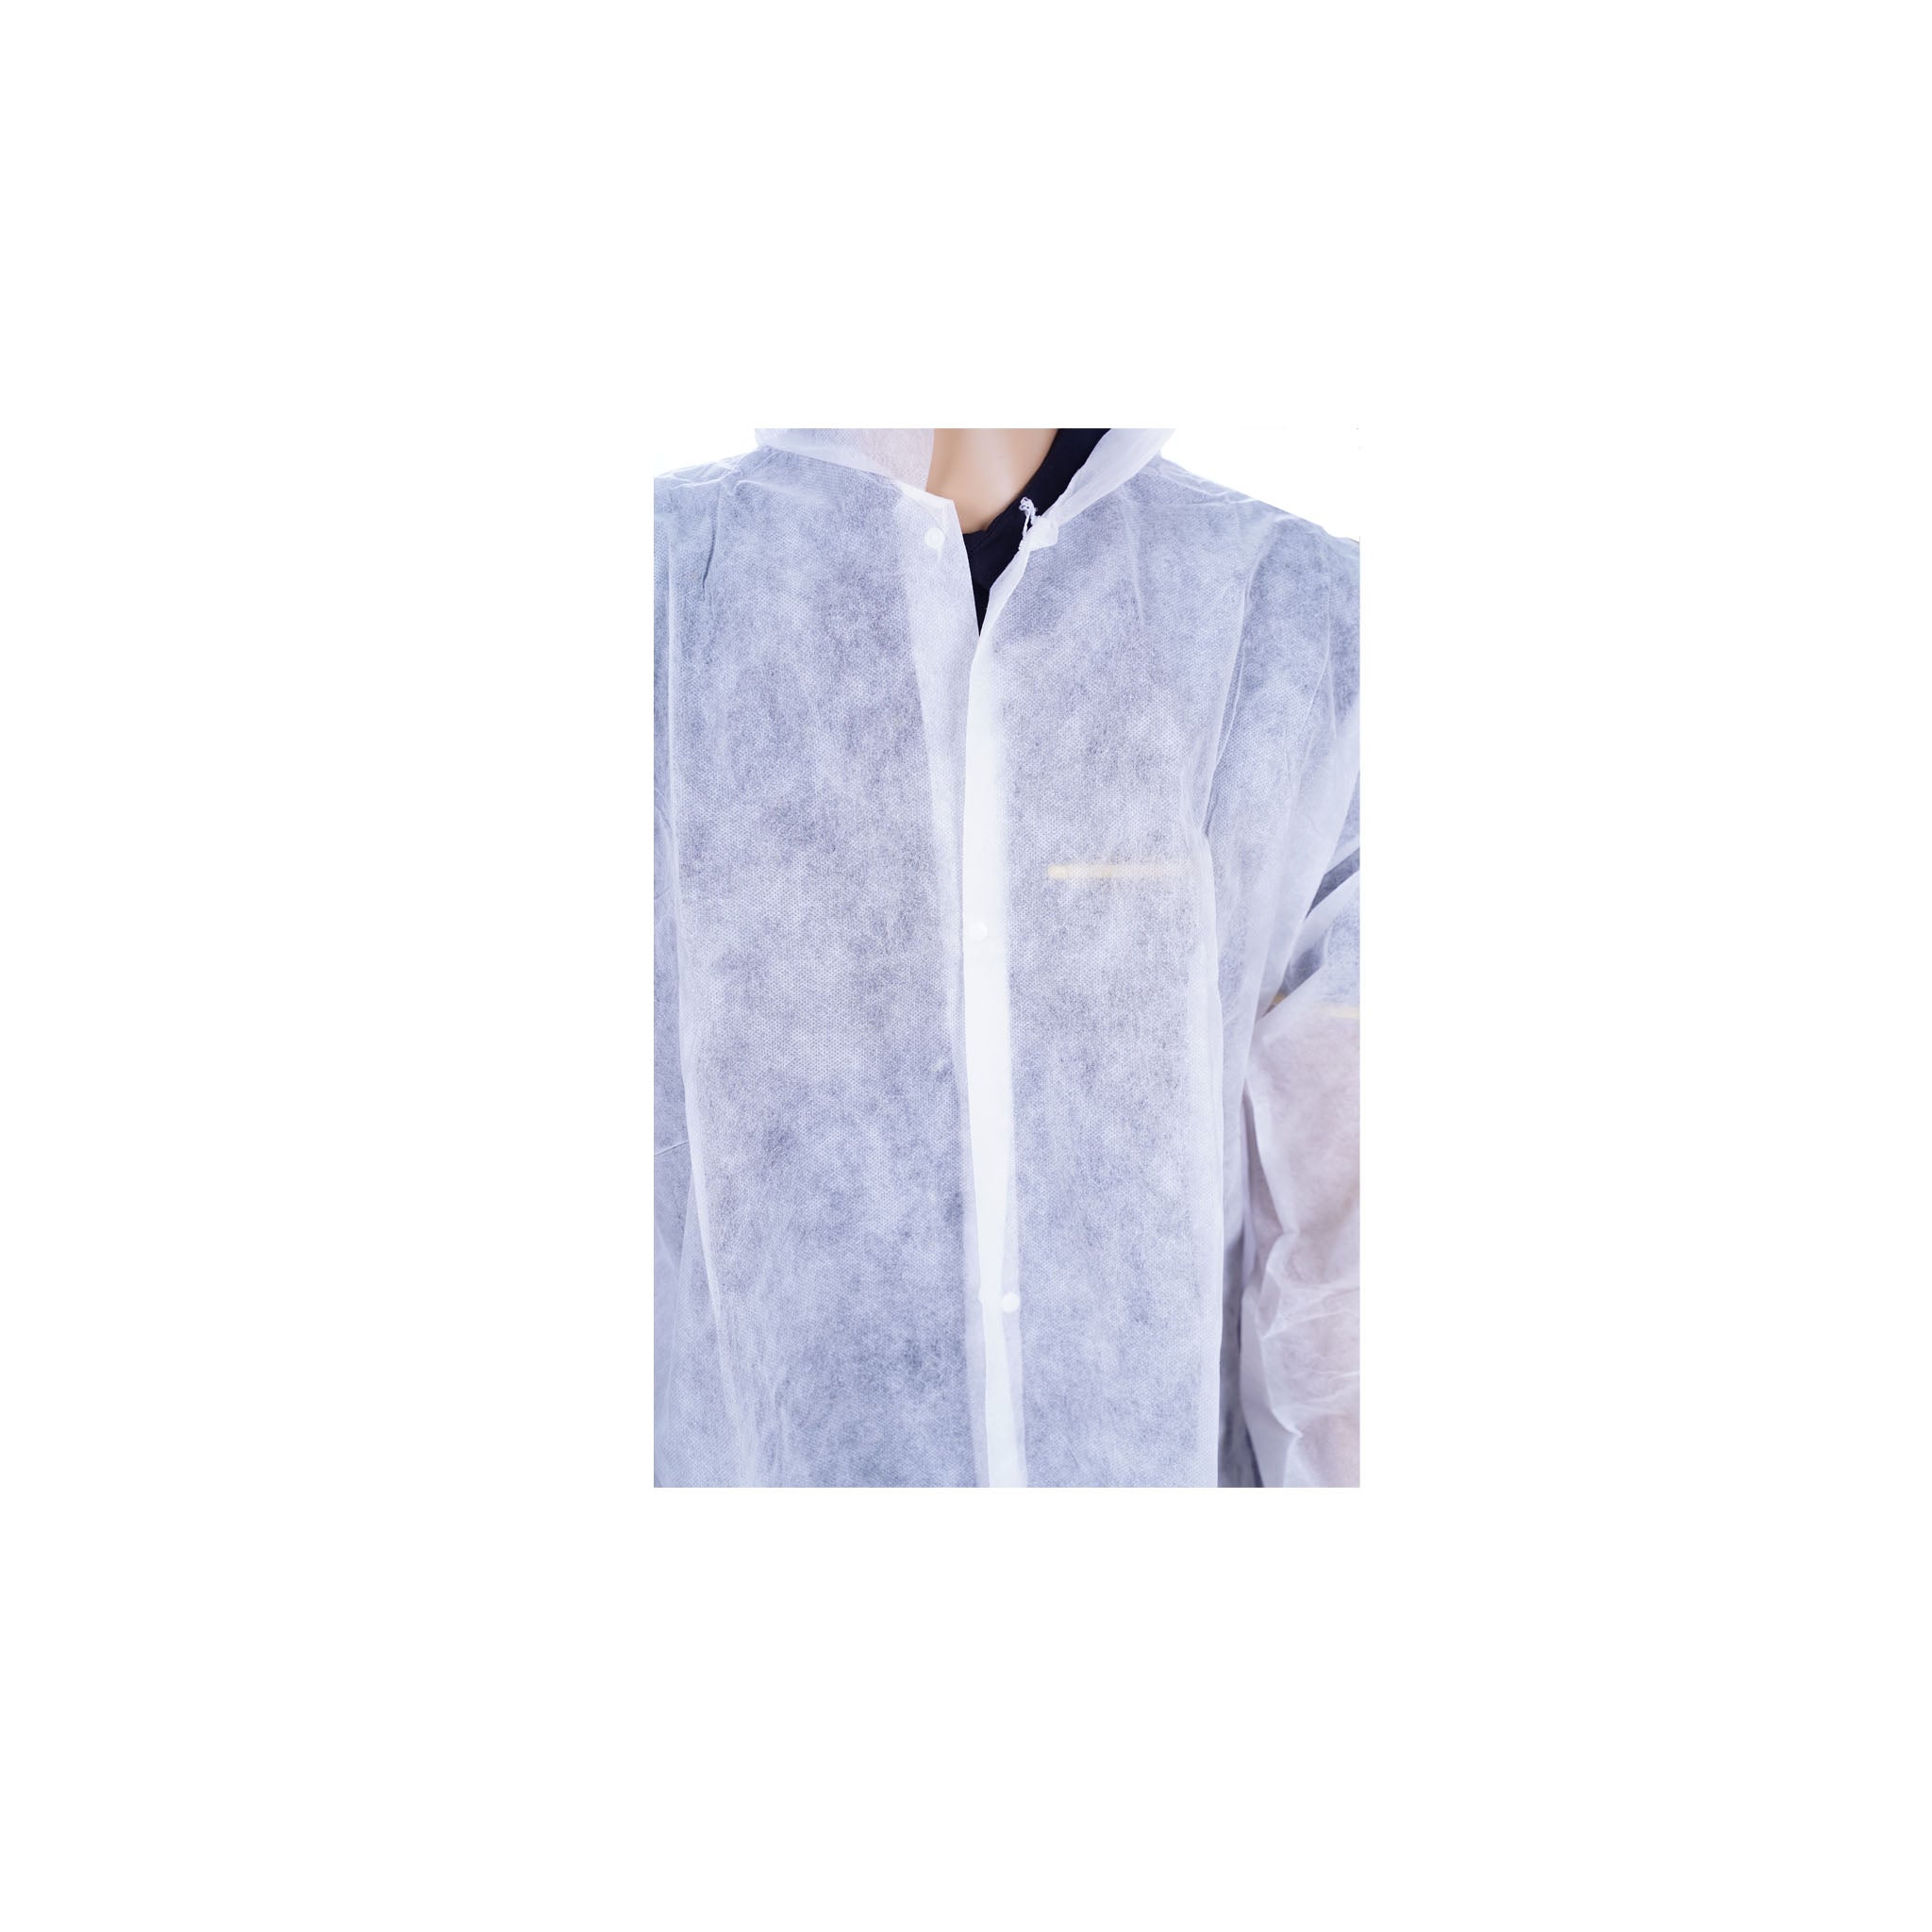 50 Pieces Non Woven Visitor Coat White Color Large